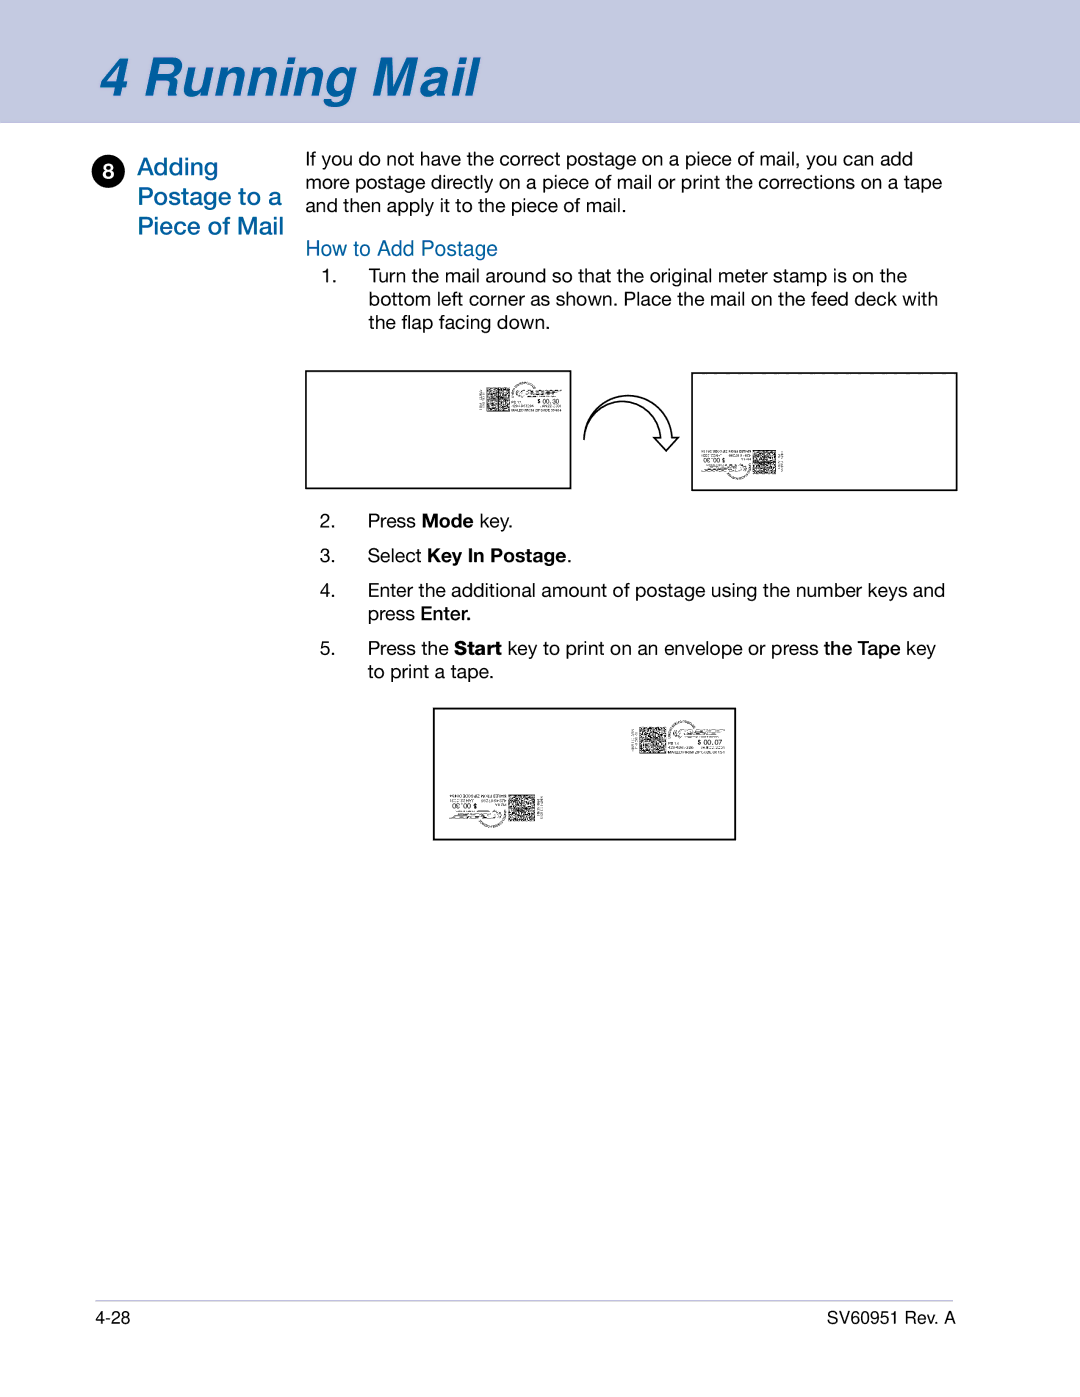 Pitney Bowes DM1000 manual Adding Postage to a Piece of Mail, How to Add Postage 